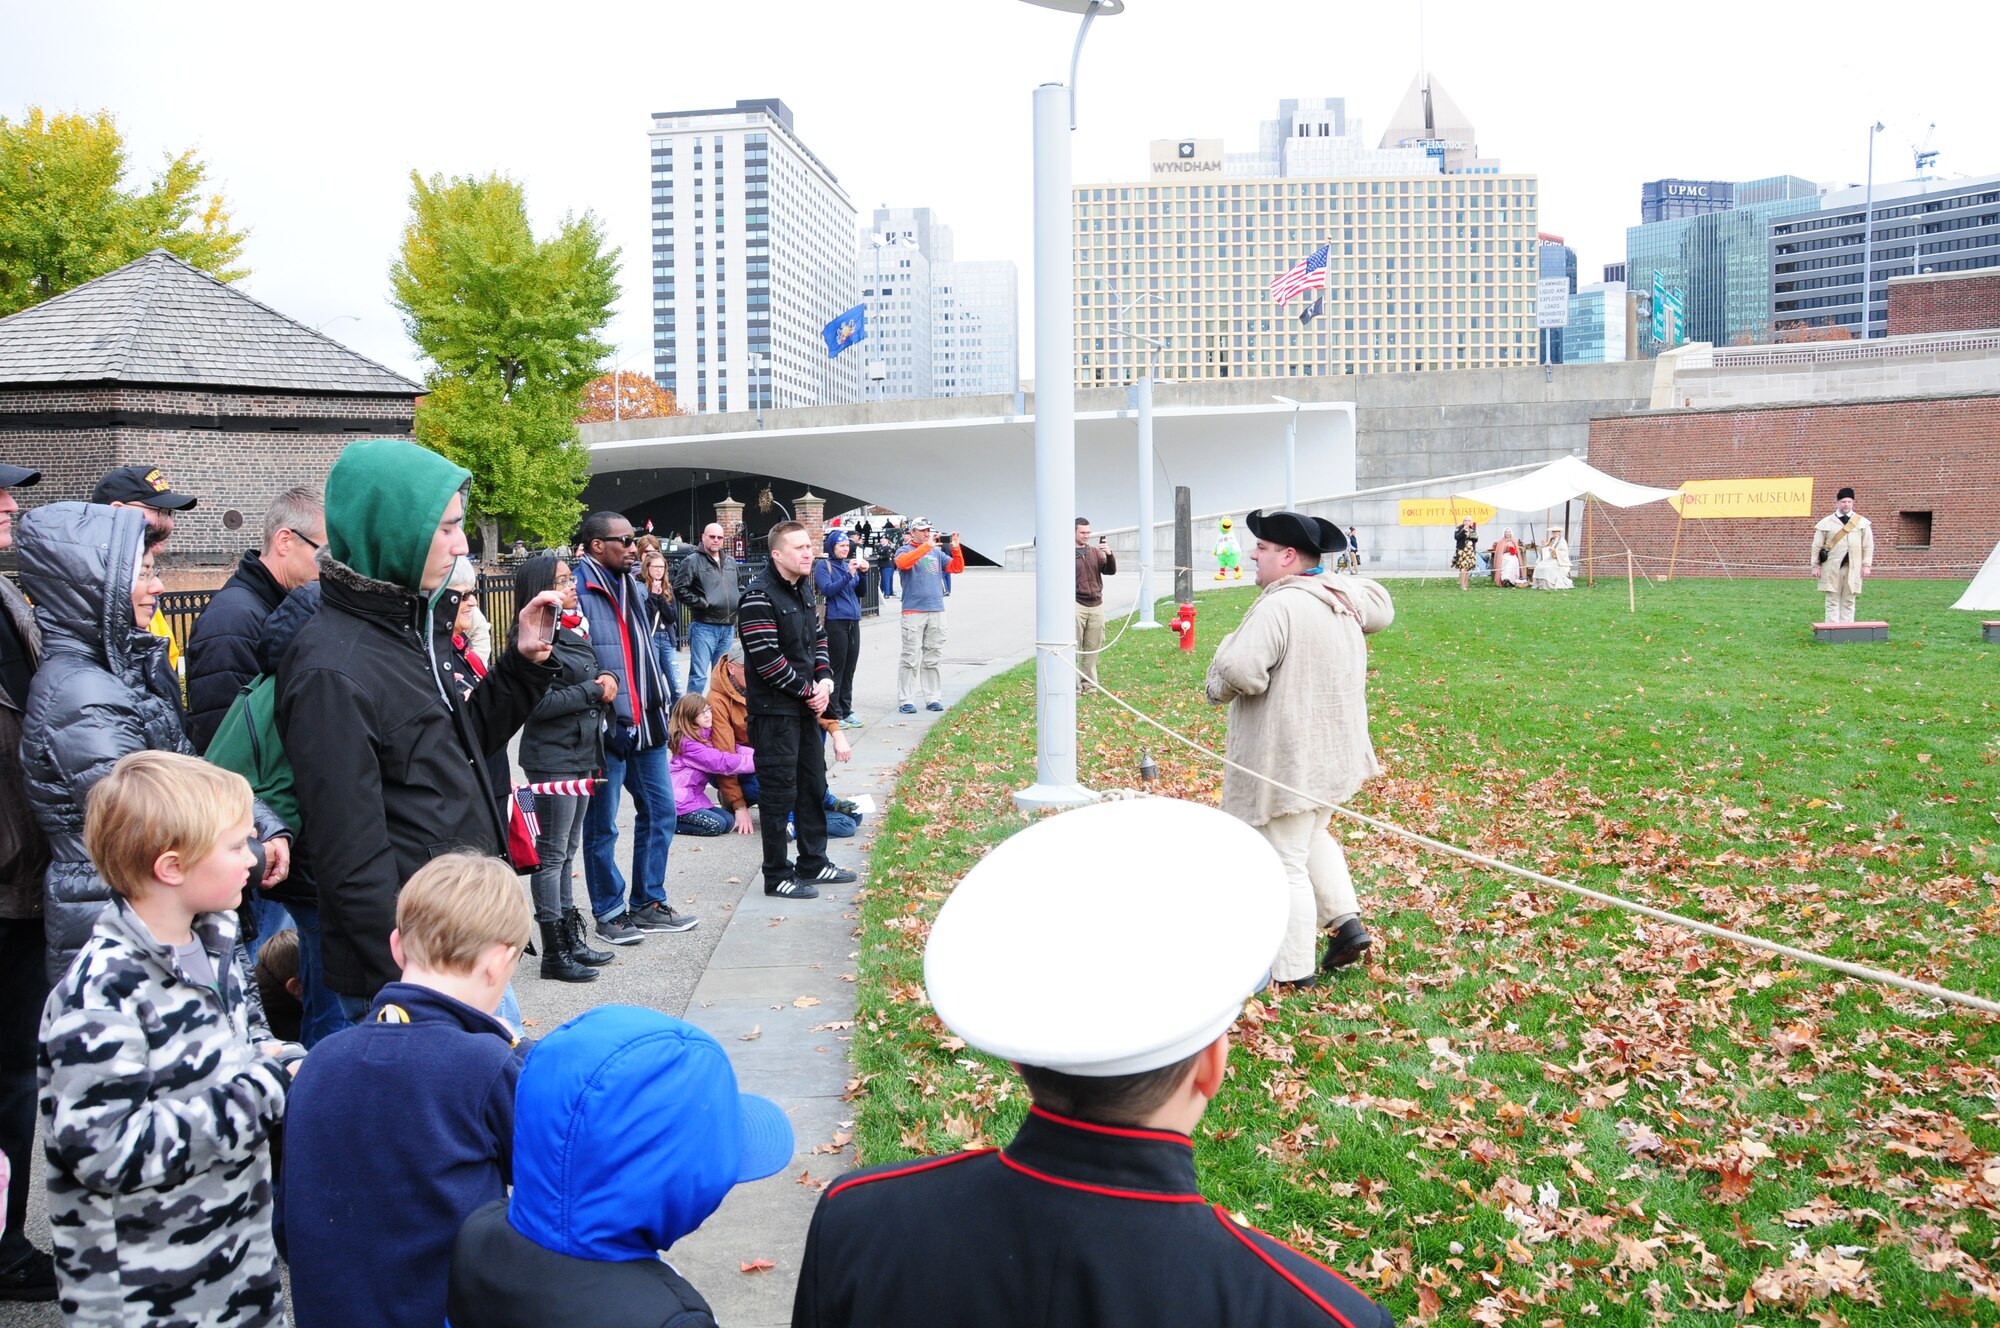 The Pennsylvania National Guard joined with the Pennsylvania Department of Conservation of Natural Resources' Point State Park and the Association of the United States Army to organize Steel City Salutes the Troops, Pittsburgh, November 8, 2014.  The event is a celebration of the region’s military history, community impact and continued relevance. (U.S. Air National Guard photo by Master Sgt. Shawn Monk/ Released)